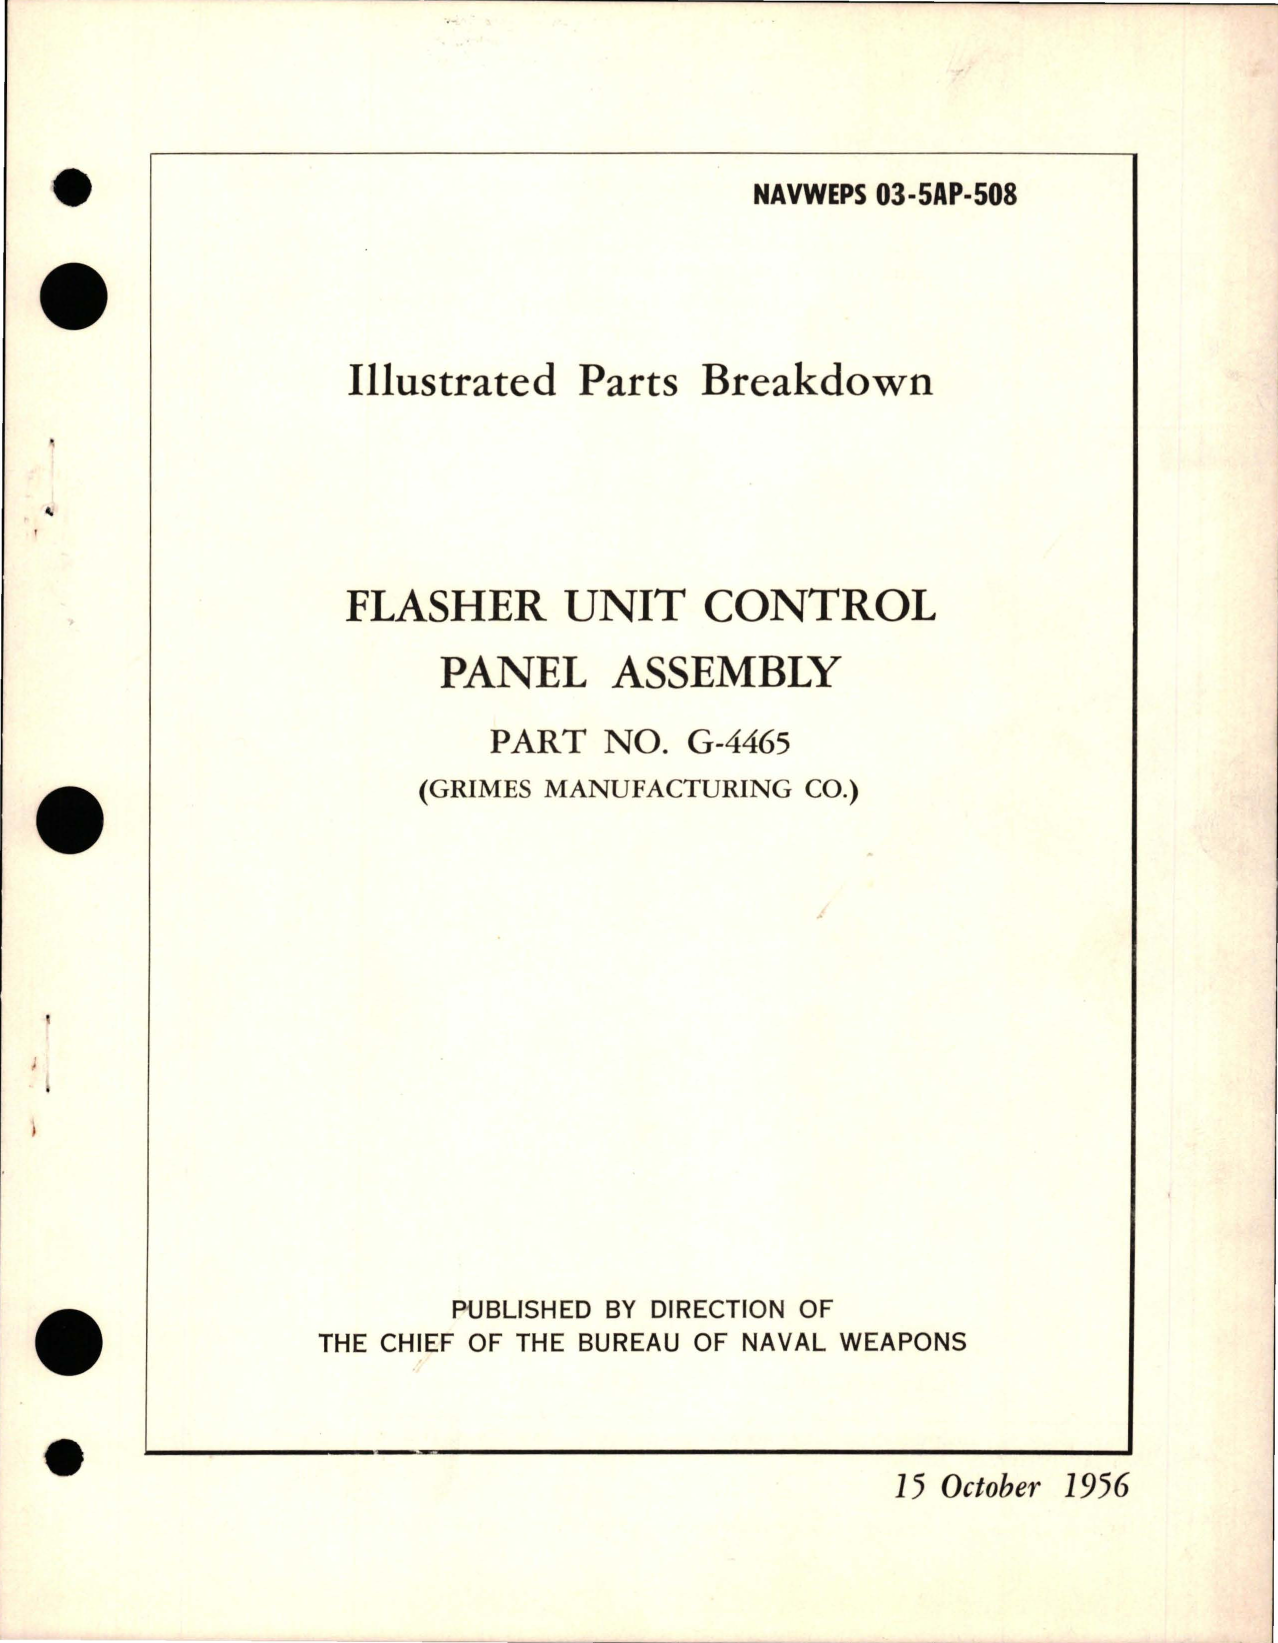 Sample page 1 from AirCorps Library document: Illustrated Parts Breakdown for Flasher Unit Control Panel Assembly - Part G-4465